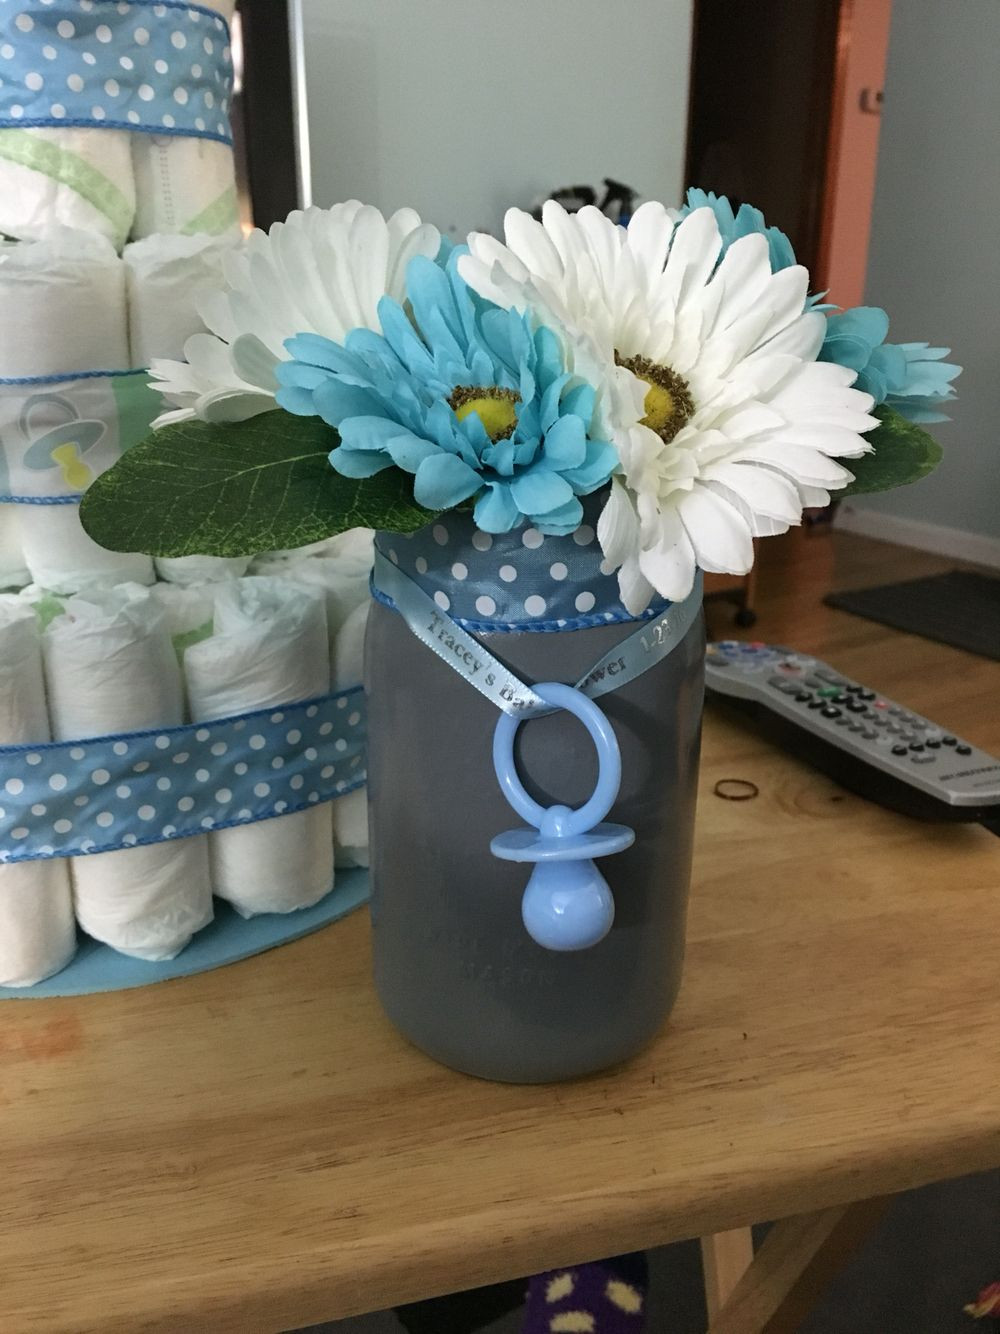 DIY Baby Boy Shower Decorations
 Spectacularly Beautiful Baby Shower Flowers Any Bud